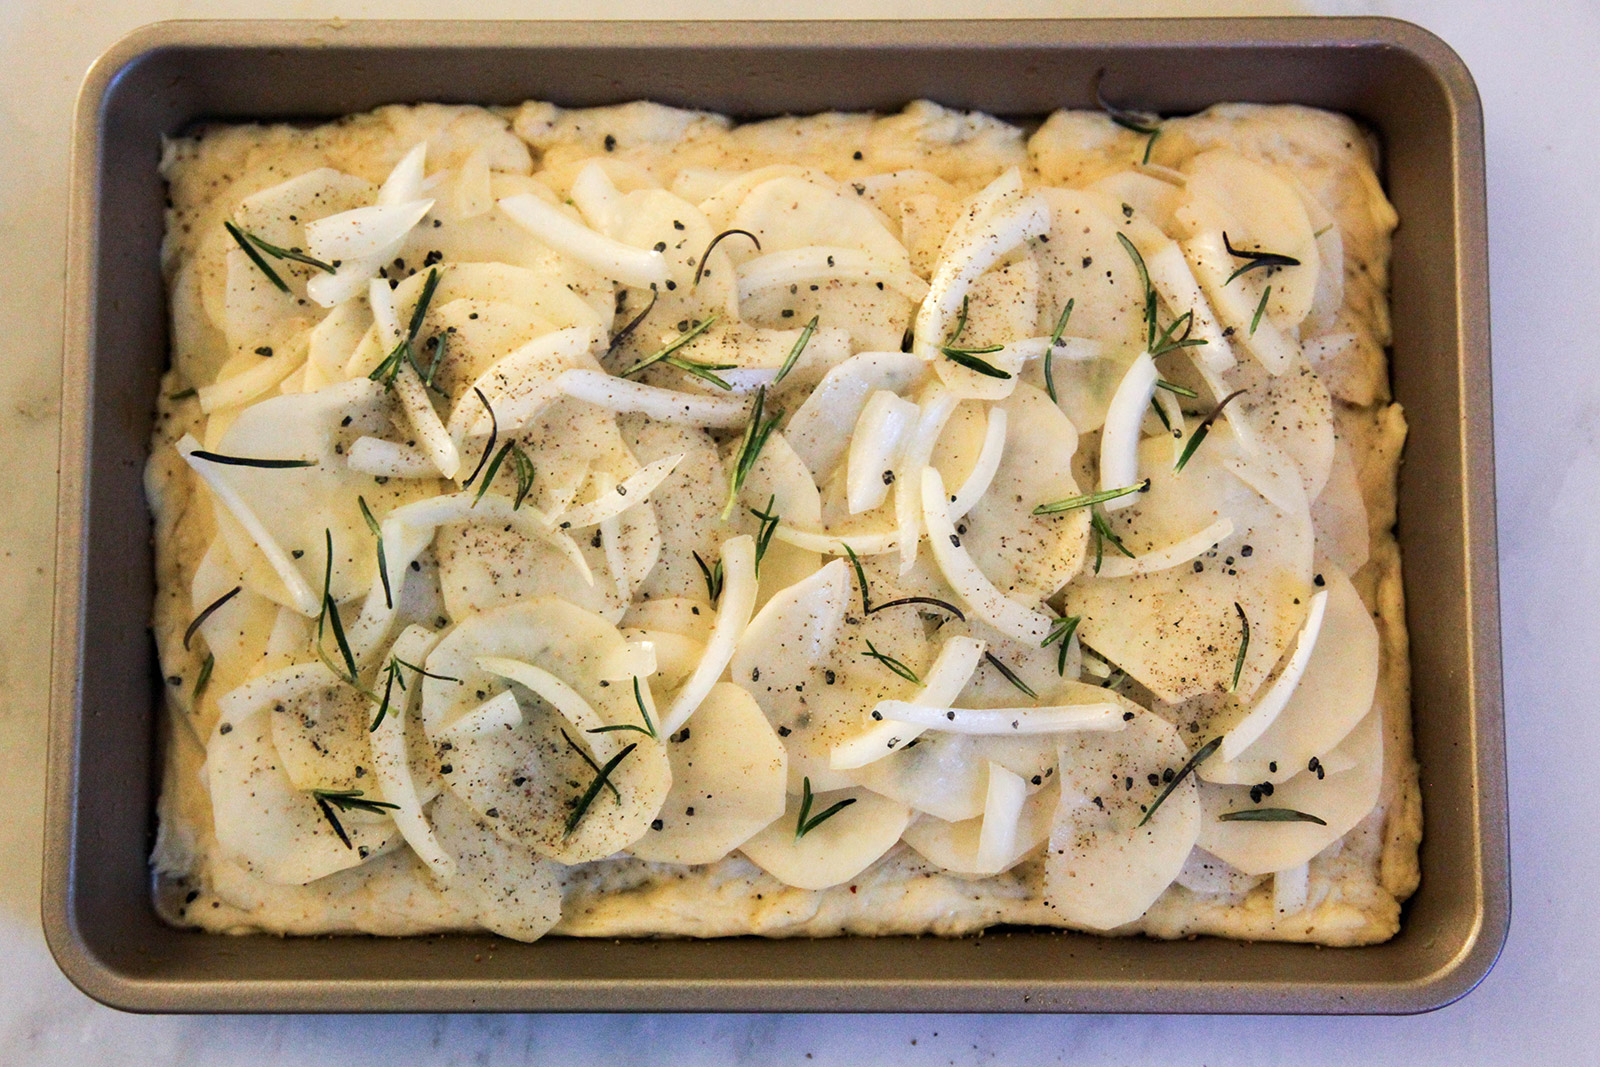 potato & onion slices, layered with rosemary and sea salt on dough base